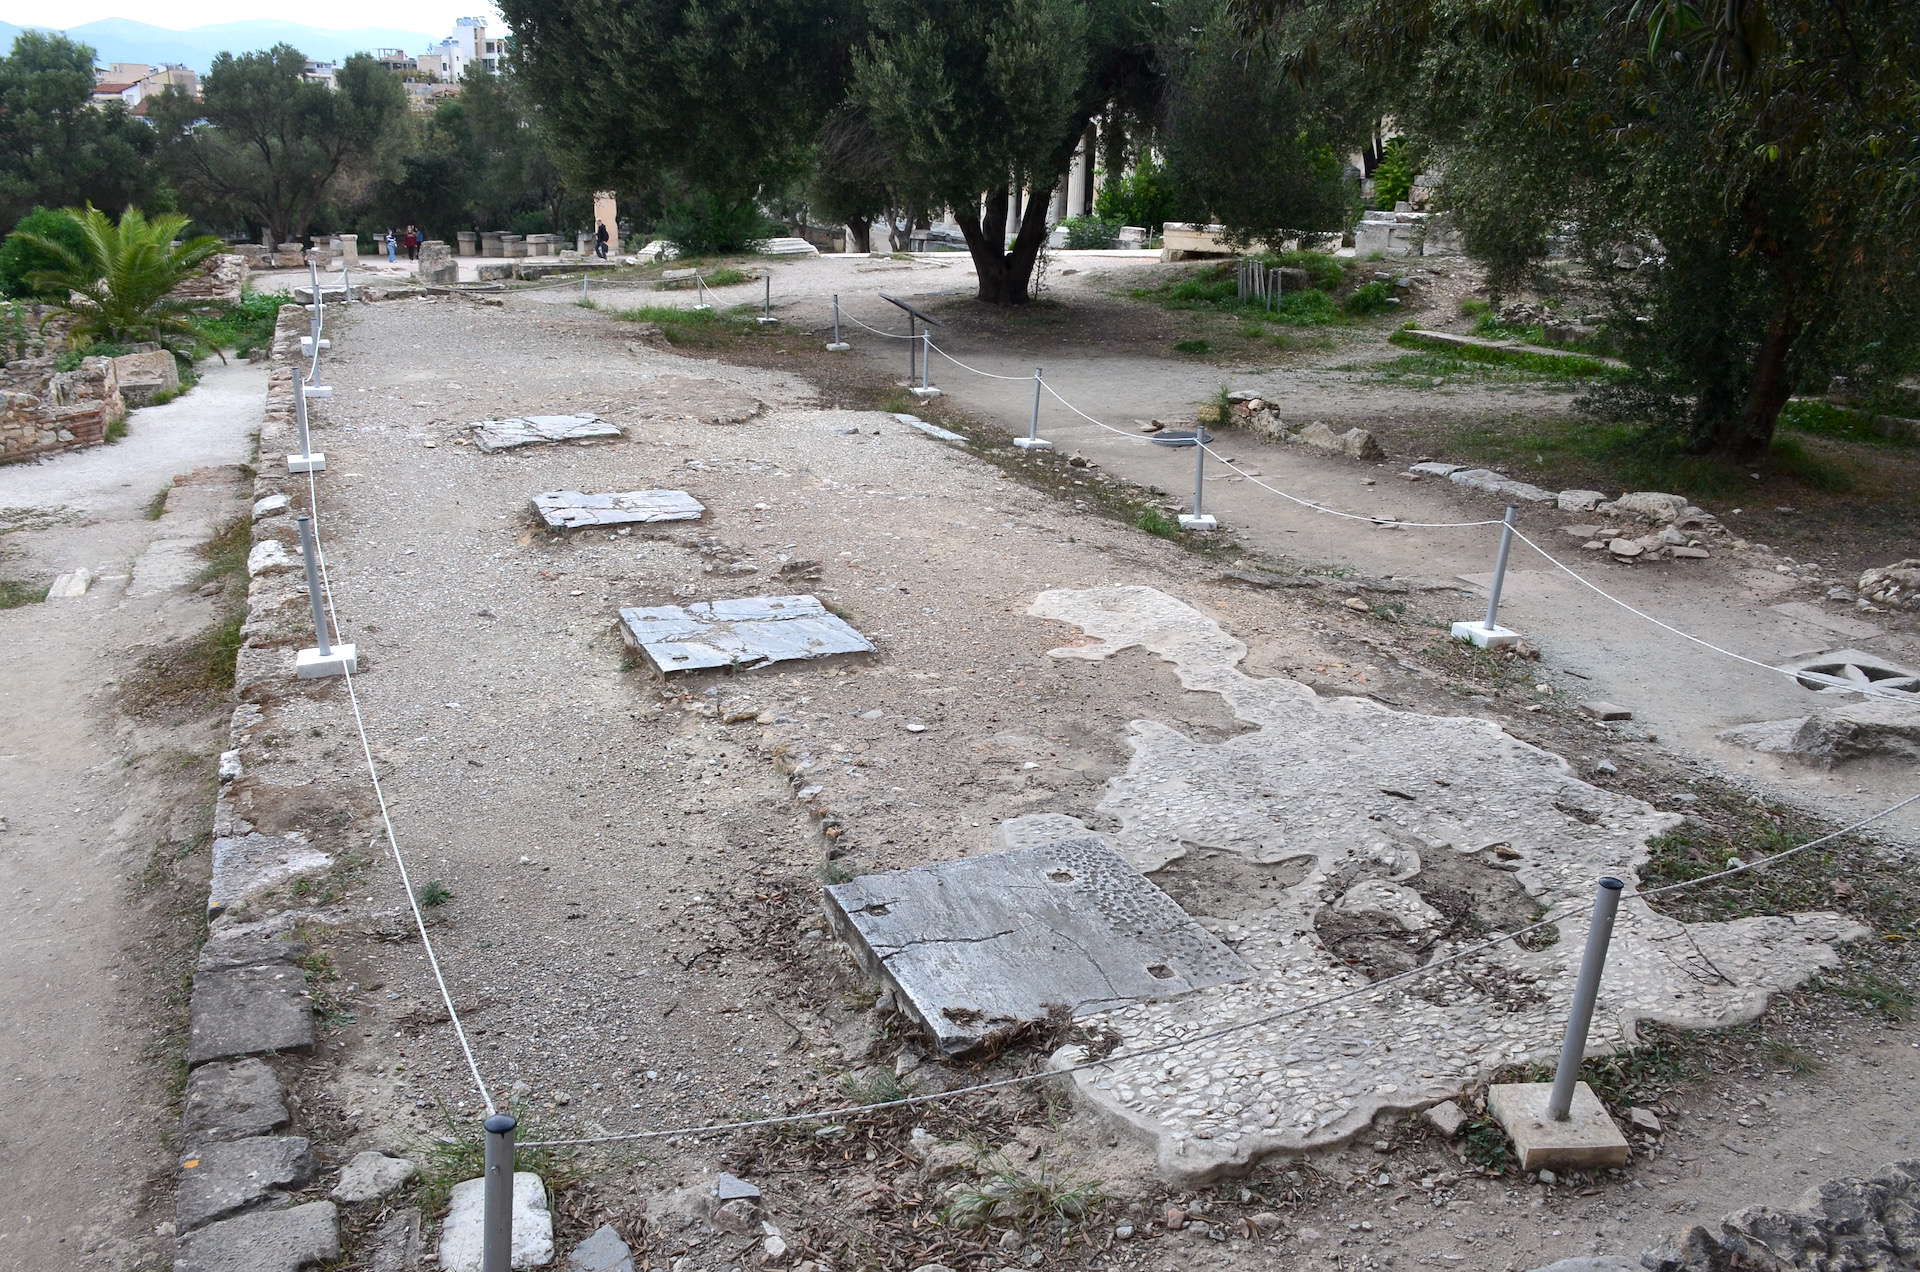 Marble blocks of the East Building at the Ancient Agora of Athens